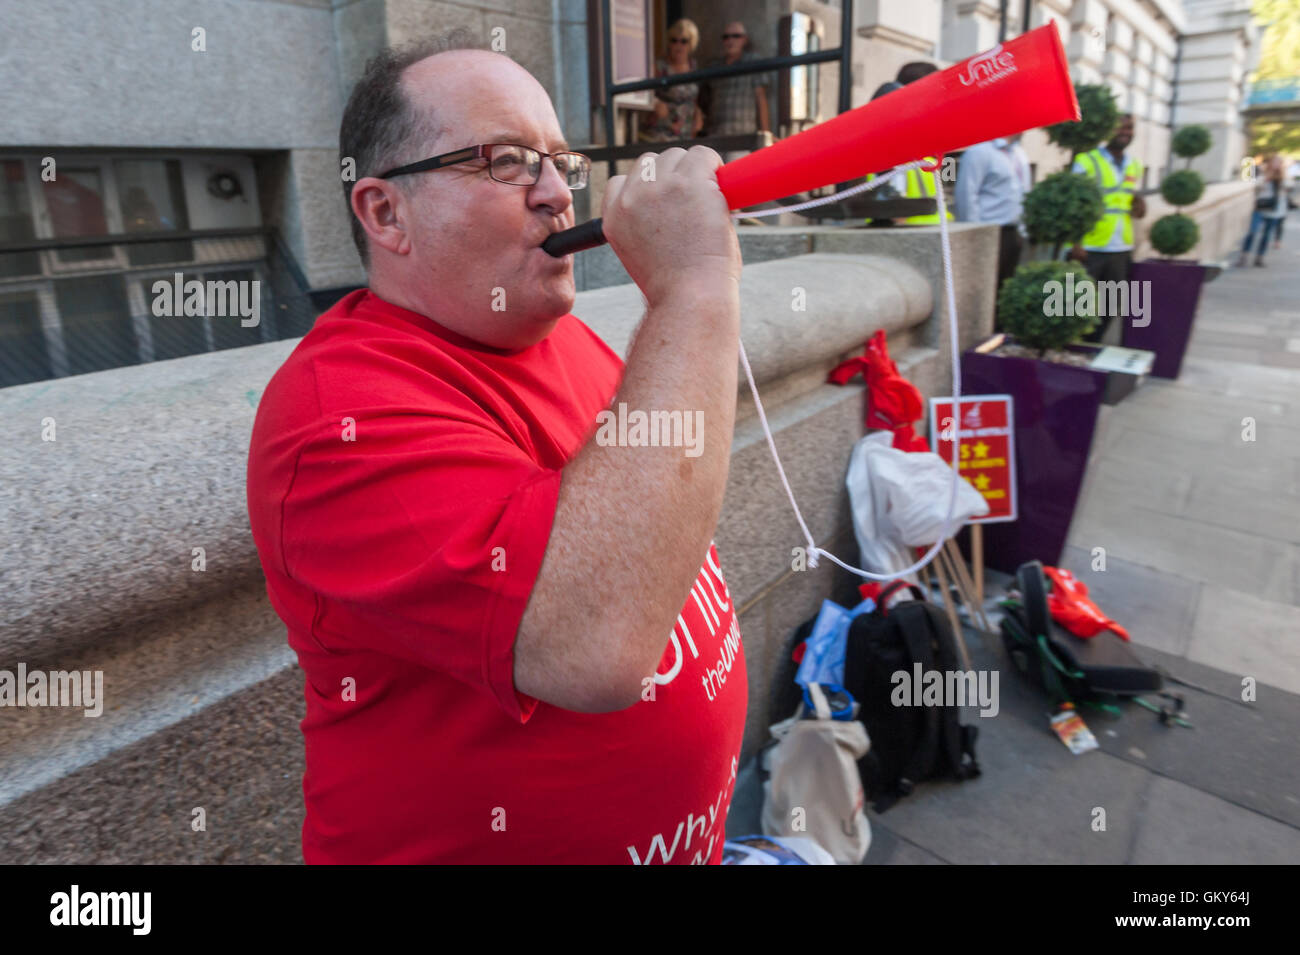 London, UK. August 23rd 2016. Unite Hospitality Workers launch their 'Unethical London' report into the bullying, harassment and victimisation of workers in London's top hotels, where management deny the right to join unions and bargain for better wages and conditions with a protest outside the Premier Inn at London County Hall. A blast on a plastic horn marks the end of their protest. Peter Marshall/Alamy Live News Stock Photo